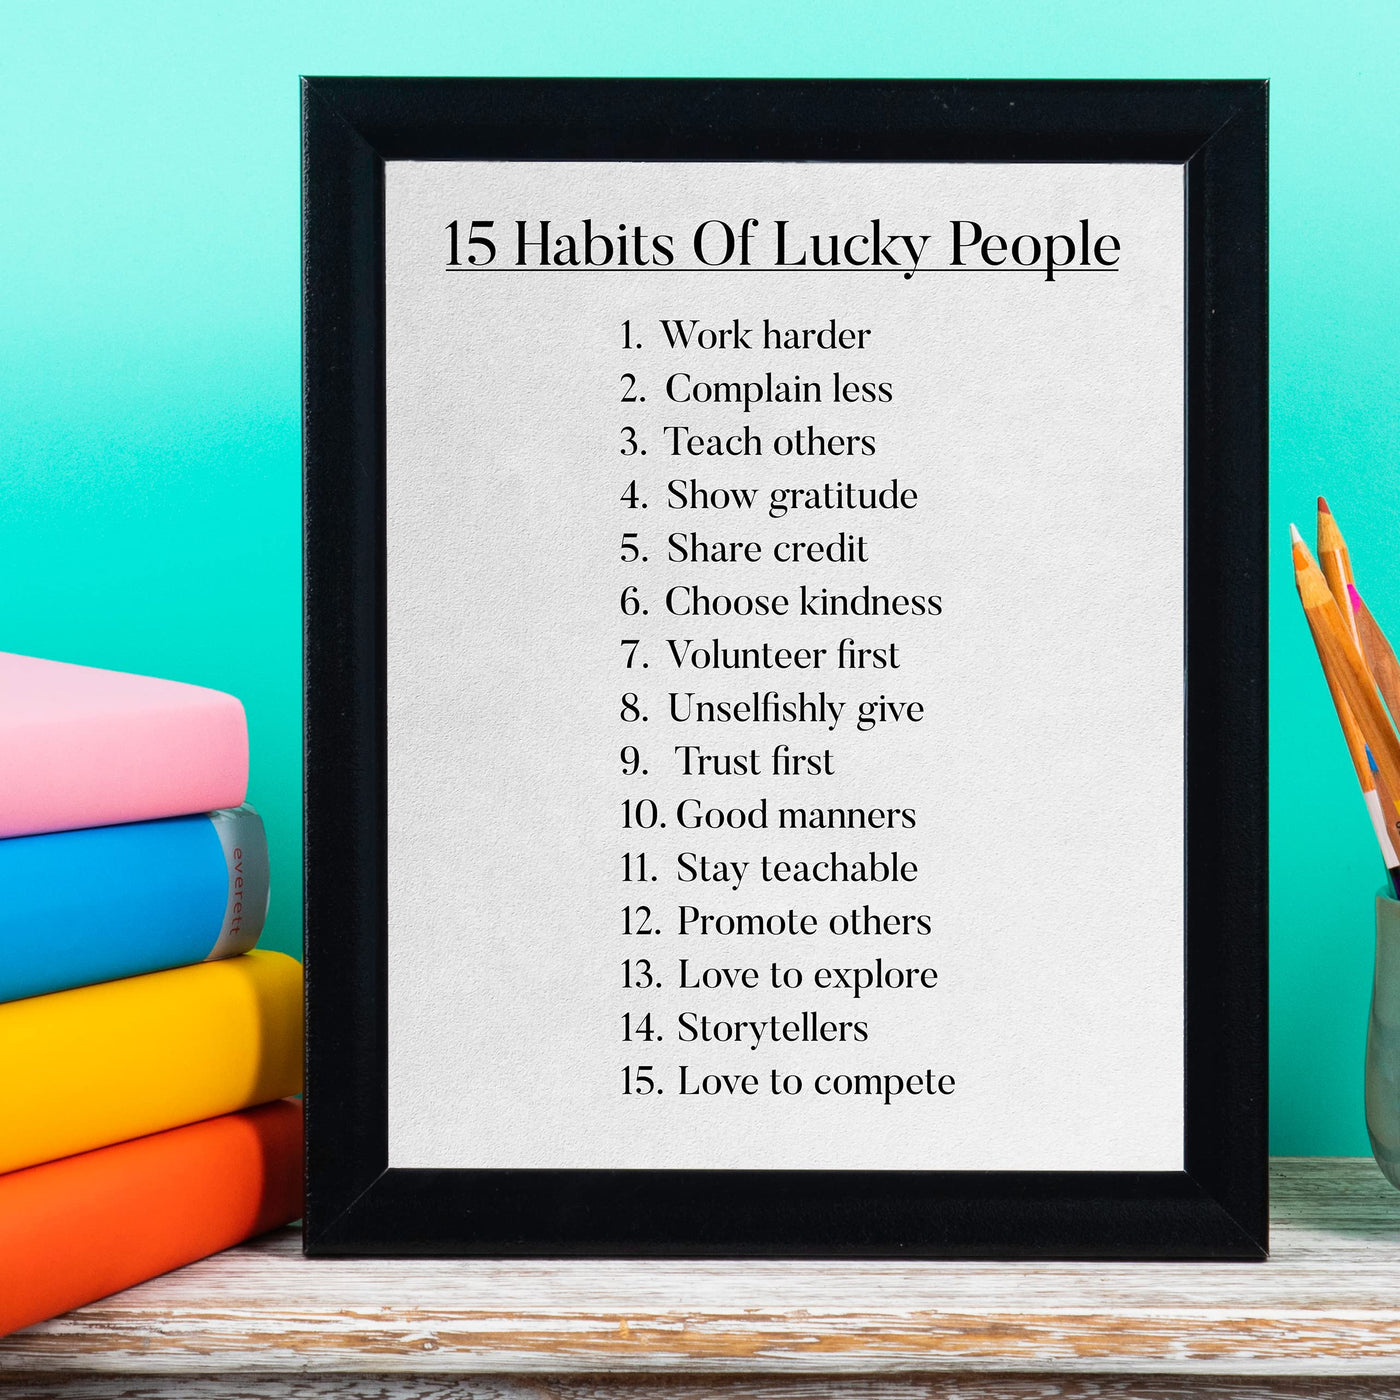 15 Habits of Lucky People-Inspirational Wall Art Sign -8 x 10" Motivational Wall Print -Ready to Frame. Positive Decoration for Home-Office-Studio-Dorm-School Decor. Great Gift for Inspiration!